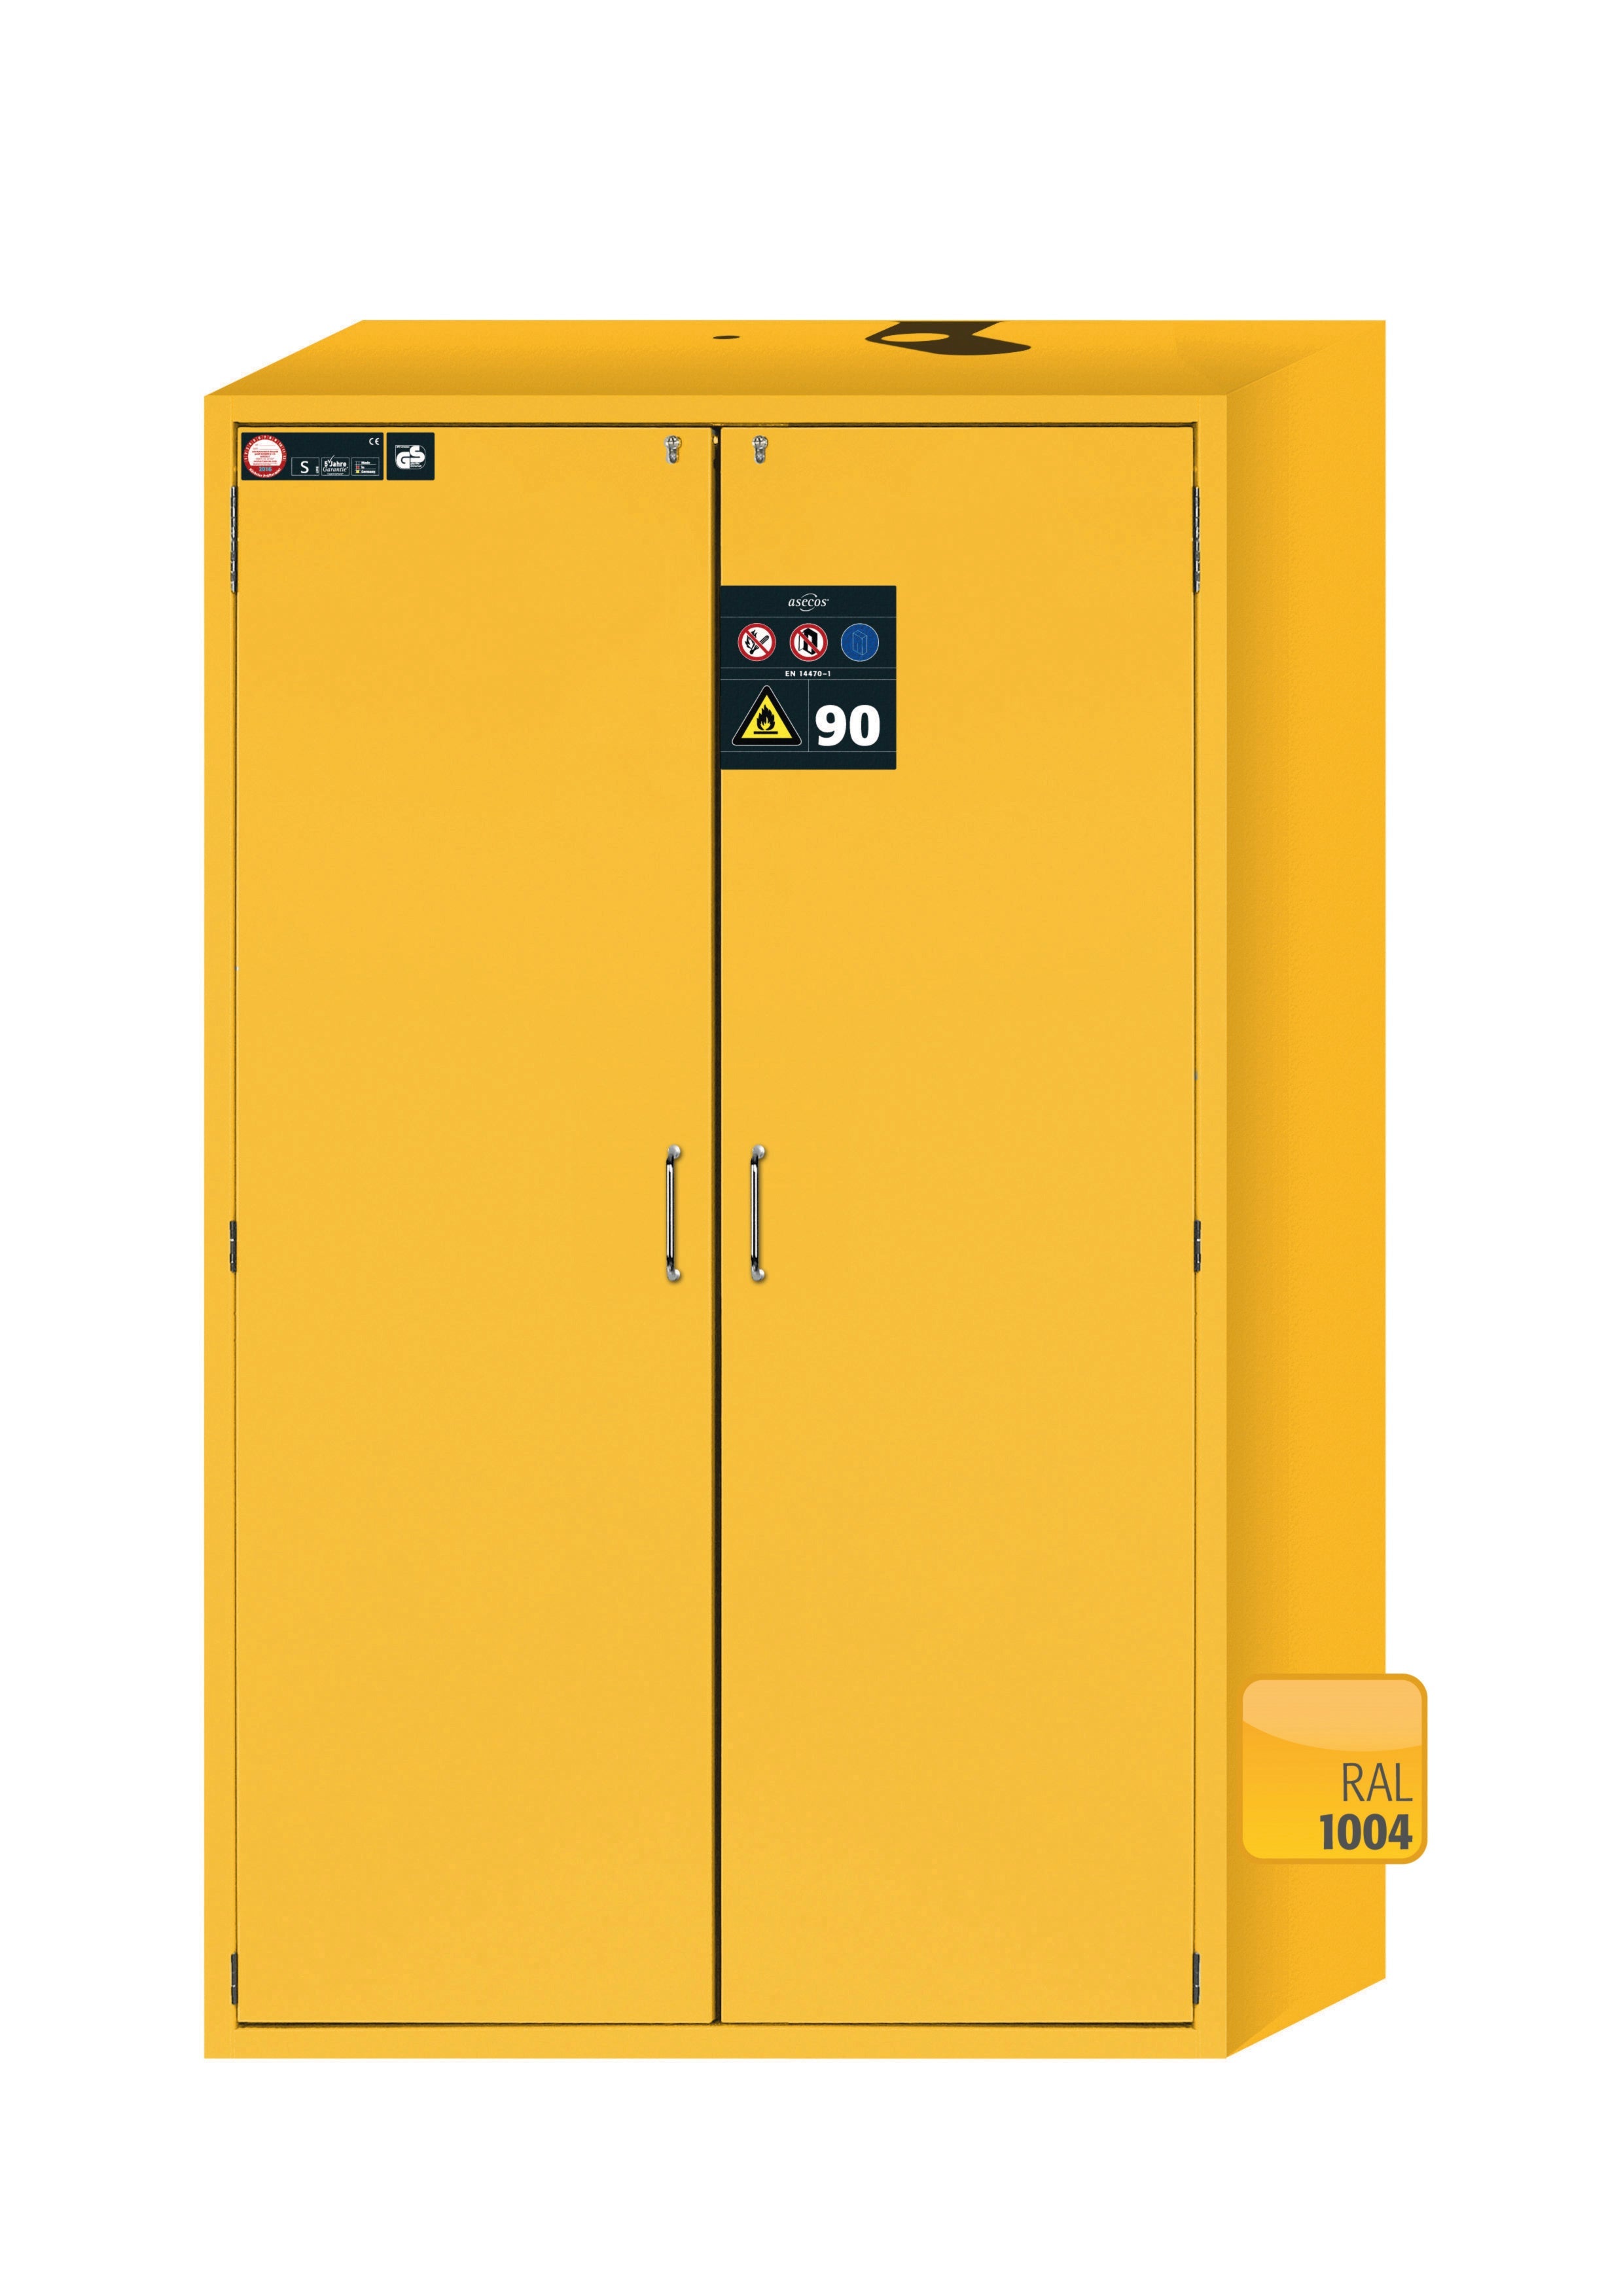 Type 90 safety cabinet S-CLASSIC-90 model S90.196.120.MV.WDAS in safety yellow RAL 1004 with 6x standard pull-out tray (stainless steel 1.4301)